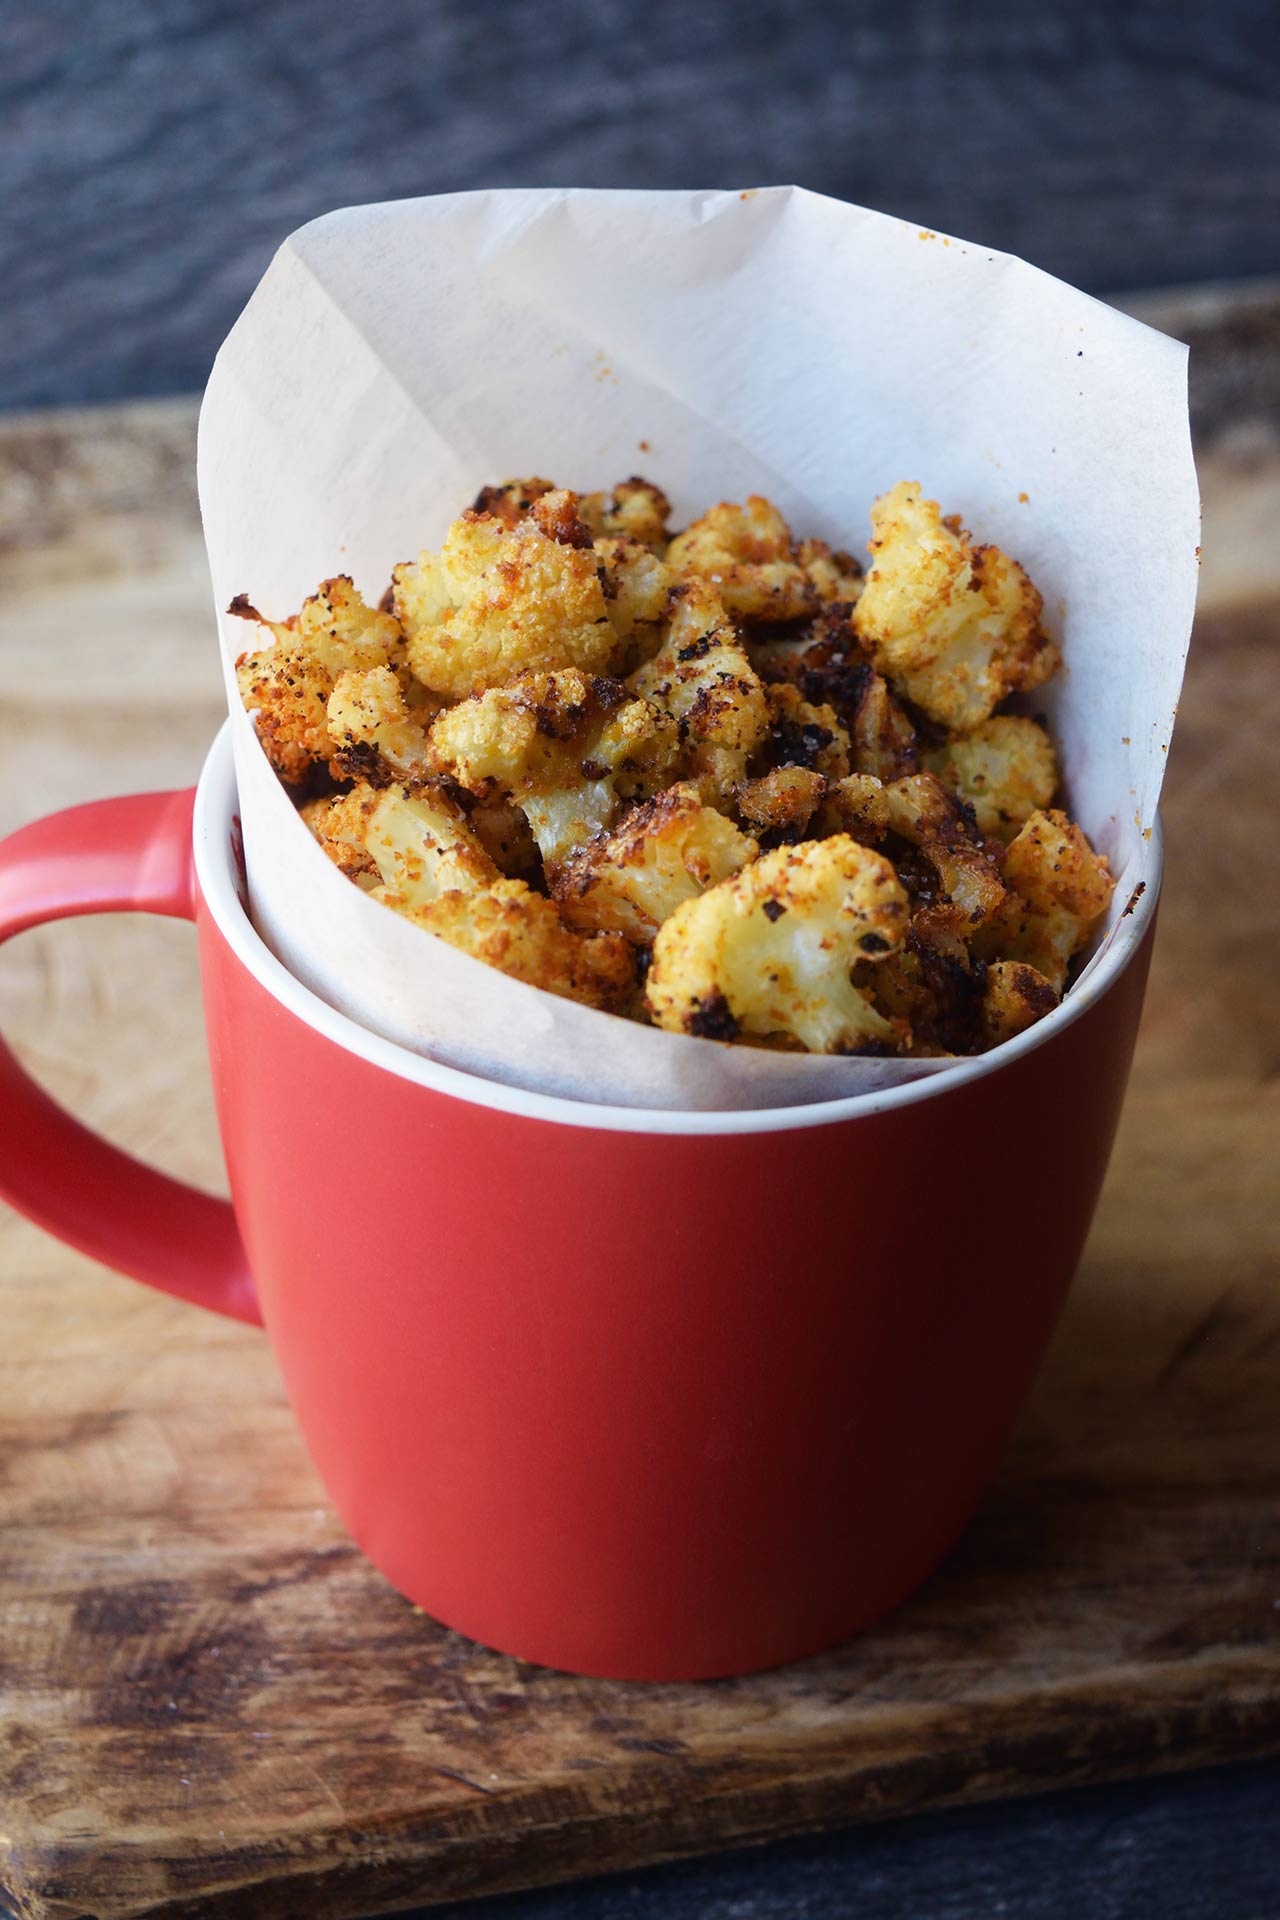 A side view of a red mug filled with cauliflower popcorn.